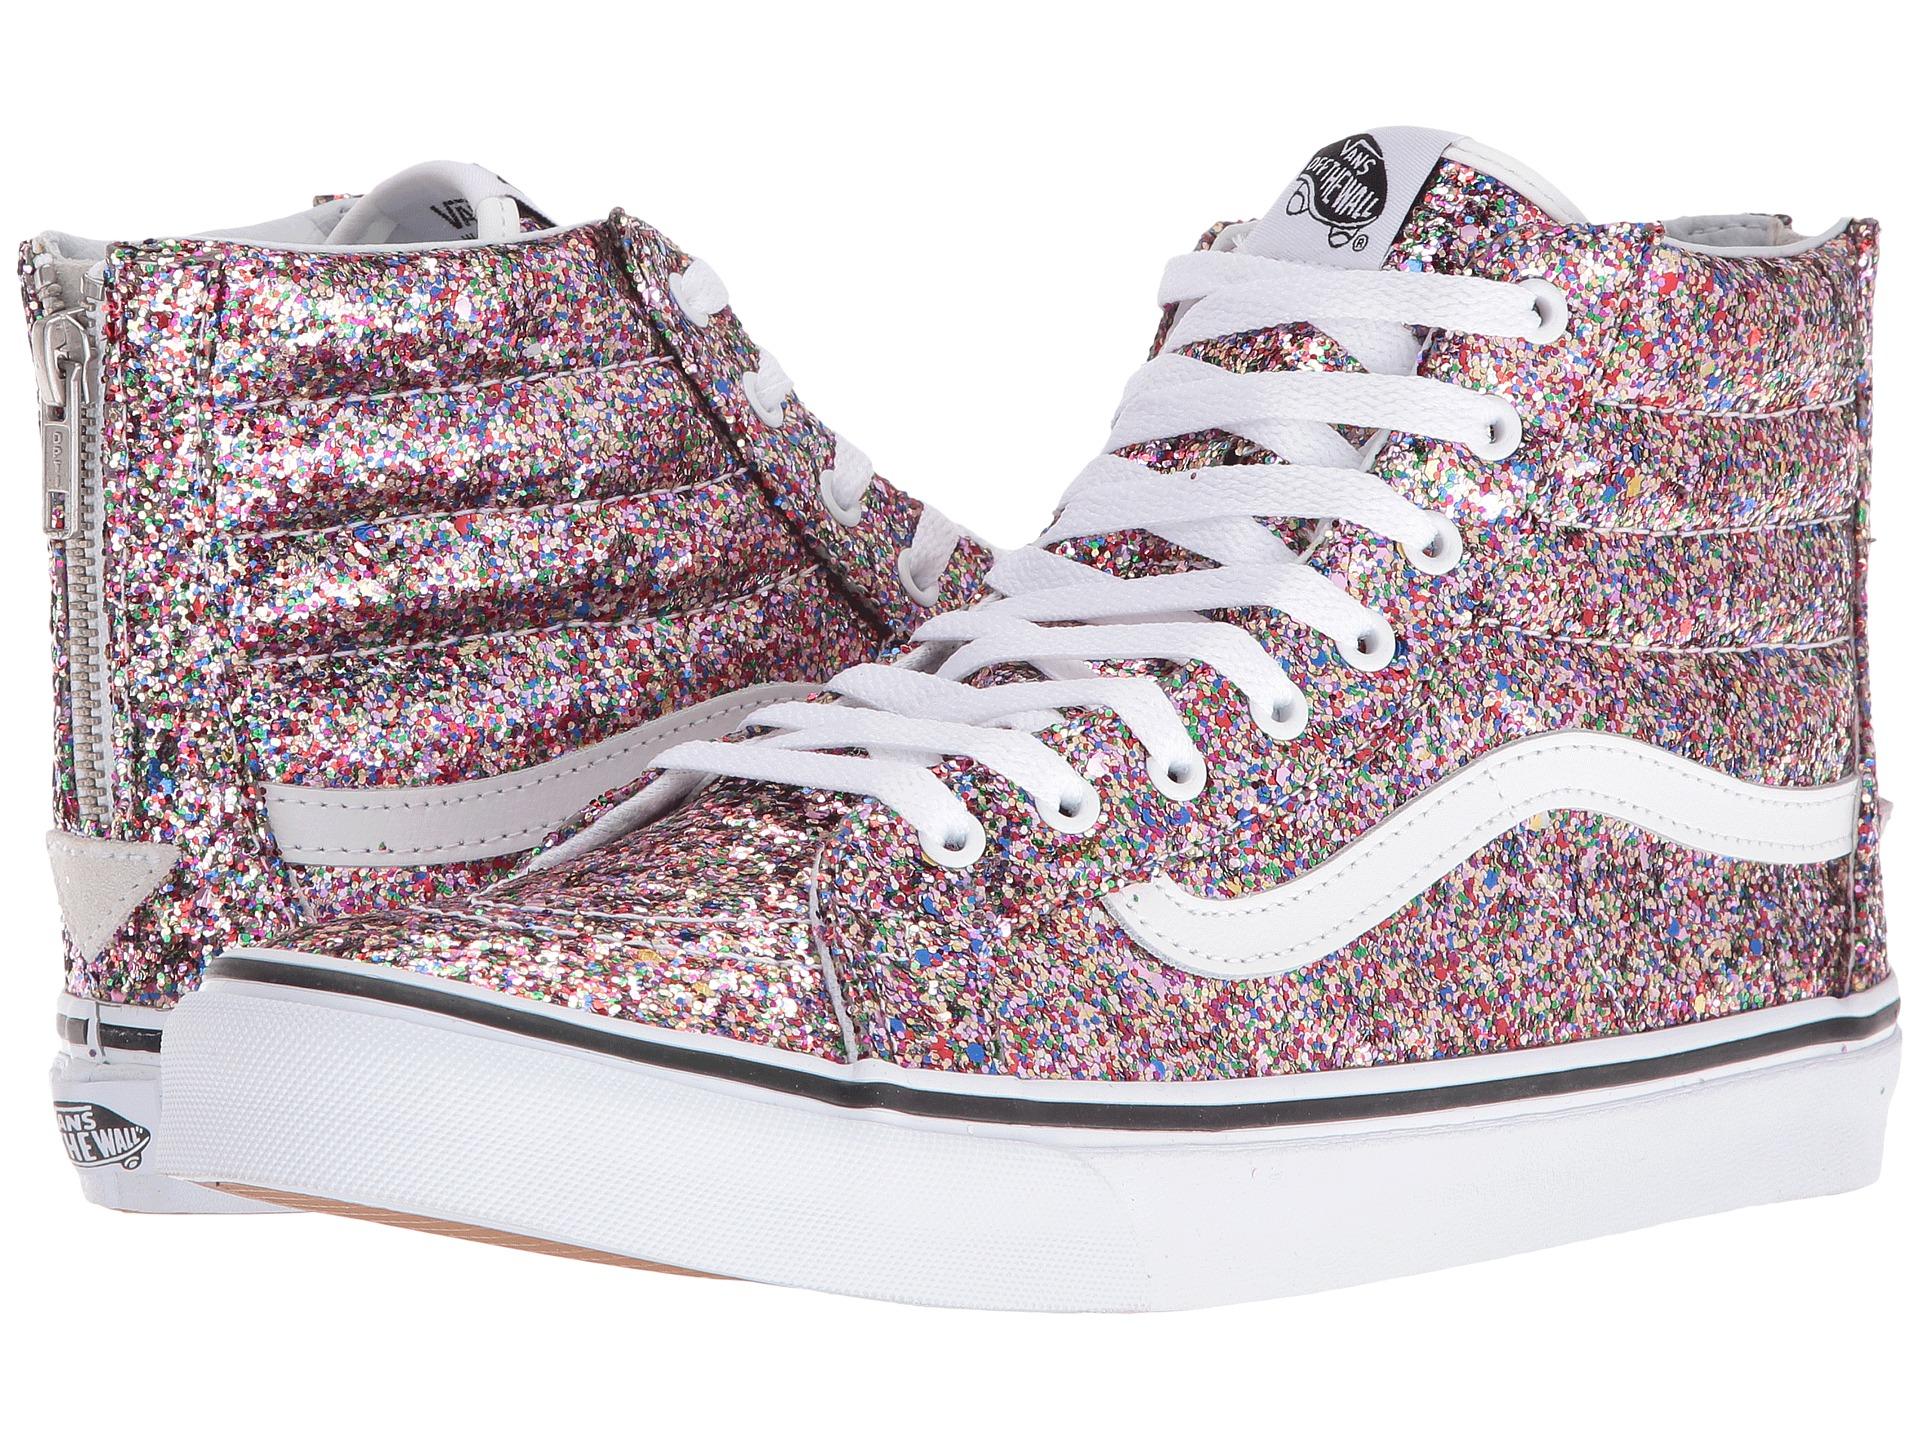 sparkly vans womens high tops